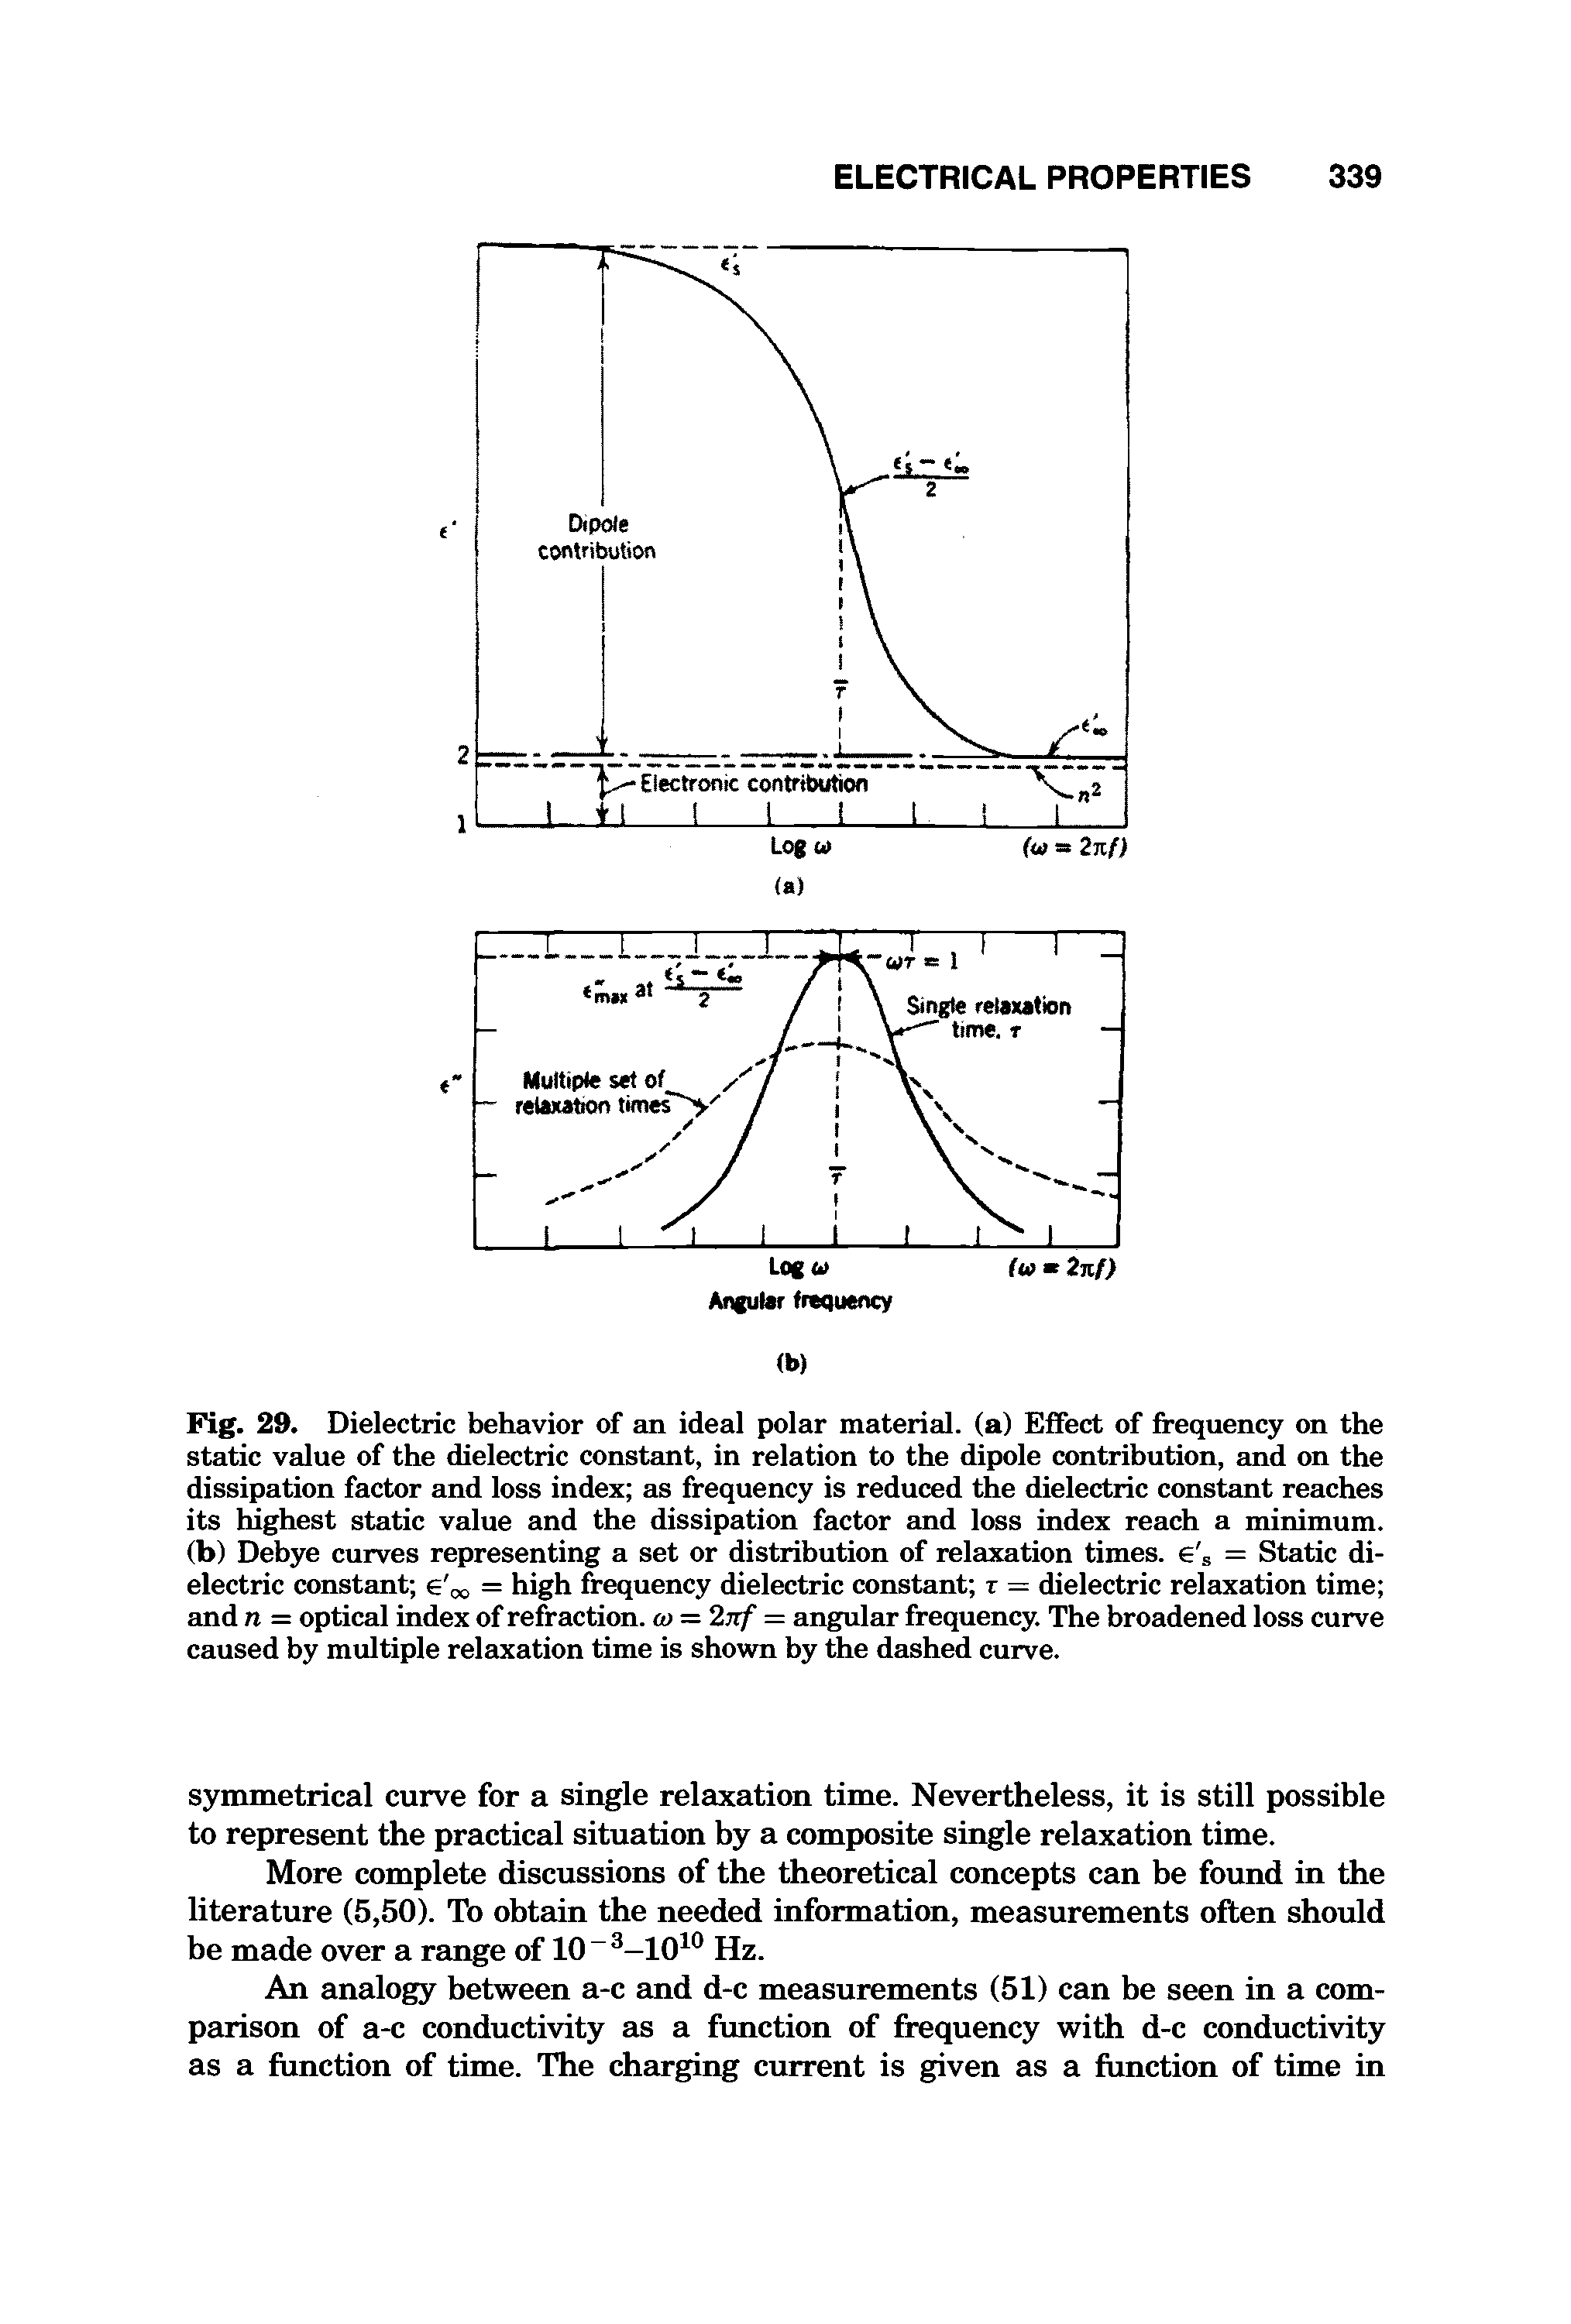 Fig. 29. Dielectric behavior of an ideal polar material, (a) Effect of frequen r on the static value of the dielectric constant, in relation to the dipole contribution, and on the dissipation factor and loss index as frequency is reduced the dielectric constant reaches its highest static value and the dissipation factor and loss index reach a minimum, (b) Debye curves representing a set or distribution of relaxation times, e s = Static dielectric constant e oo = high frequency dielectric constant t = dielectric relaxation time and n = optical index of refraction, m = 27zf = angular frequency. The broadened loss curve caused by multiple relaxation time is shown by the dashed curve.